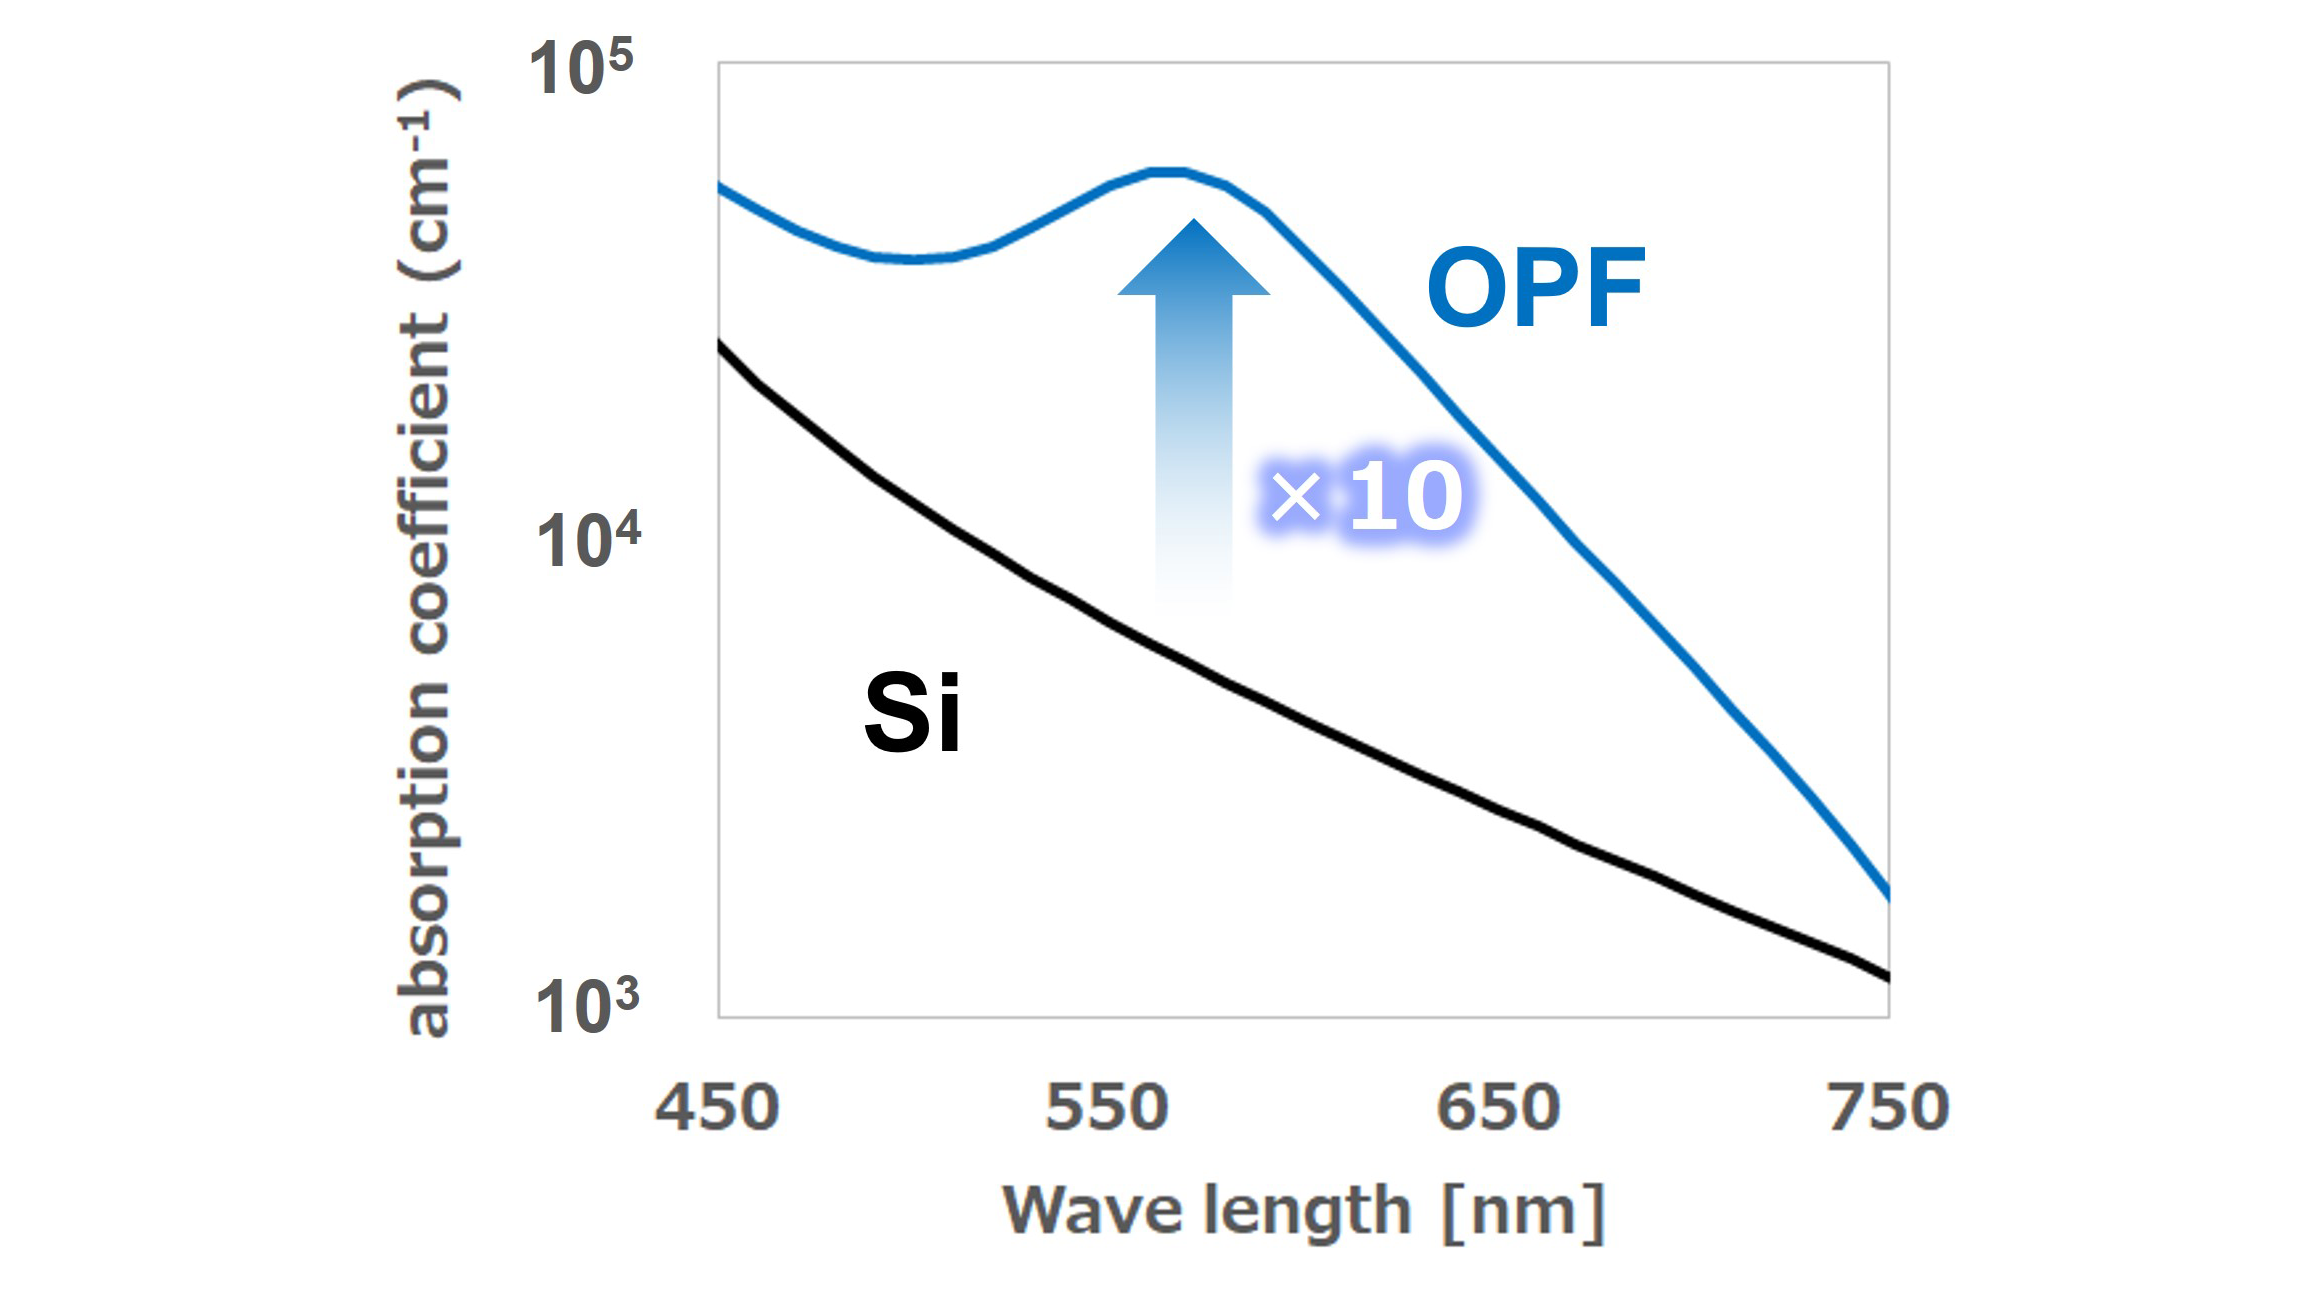 Figure 4. Optical absorption coefficients of OPF and Si